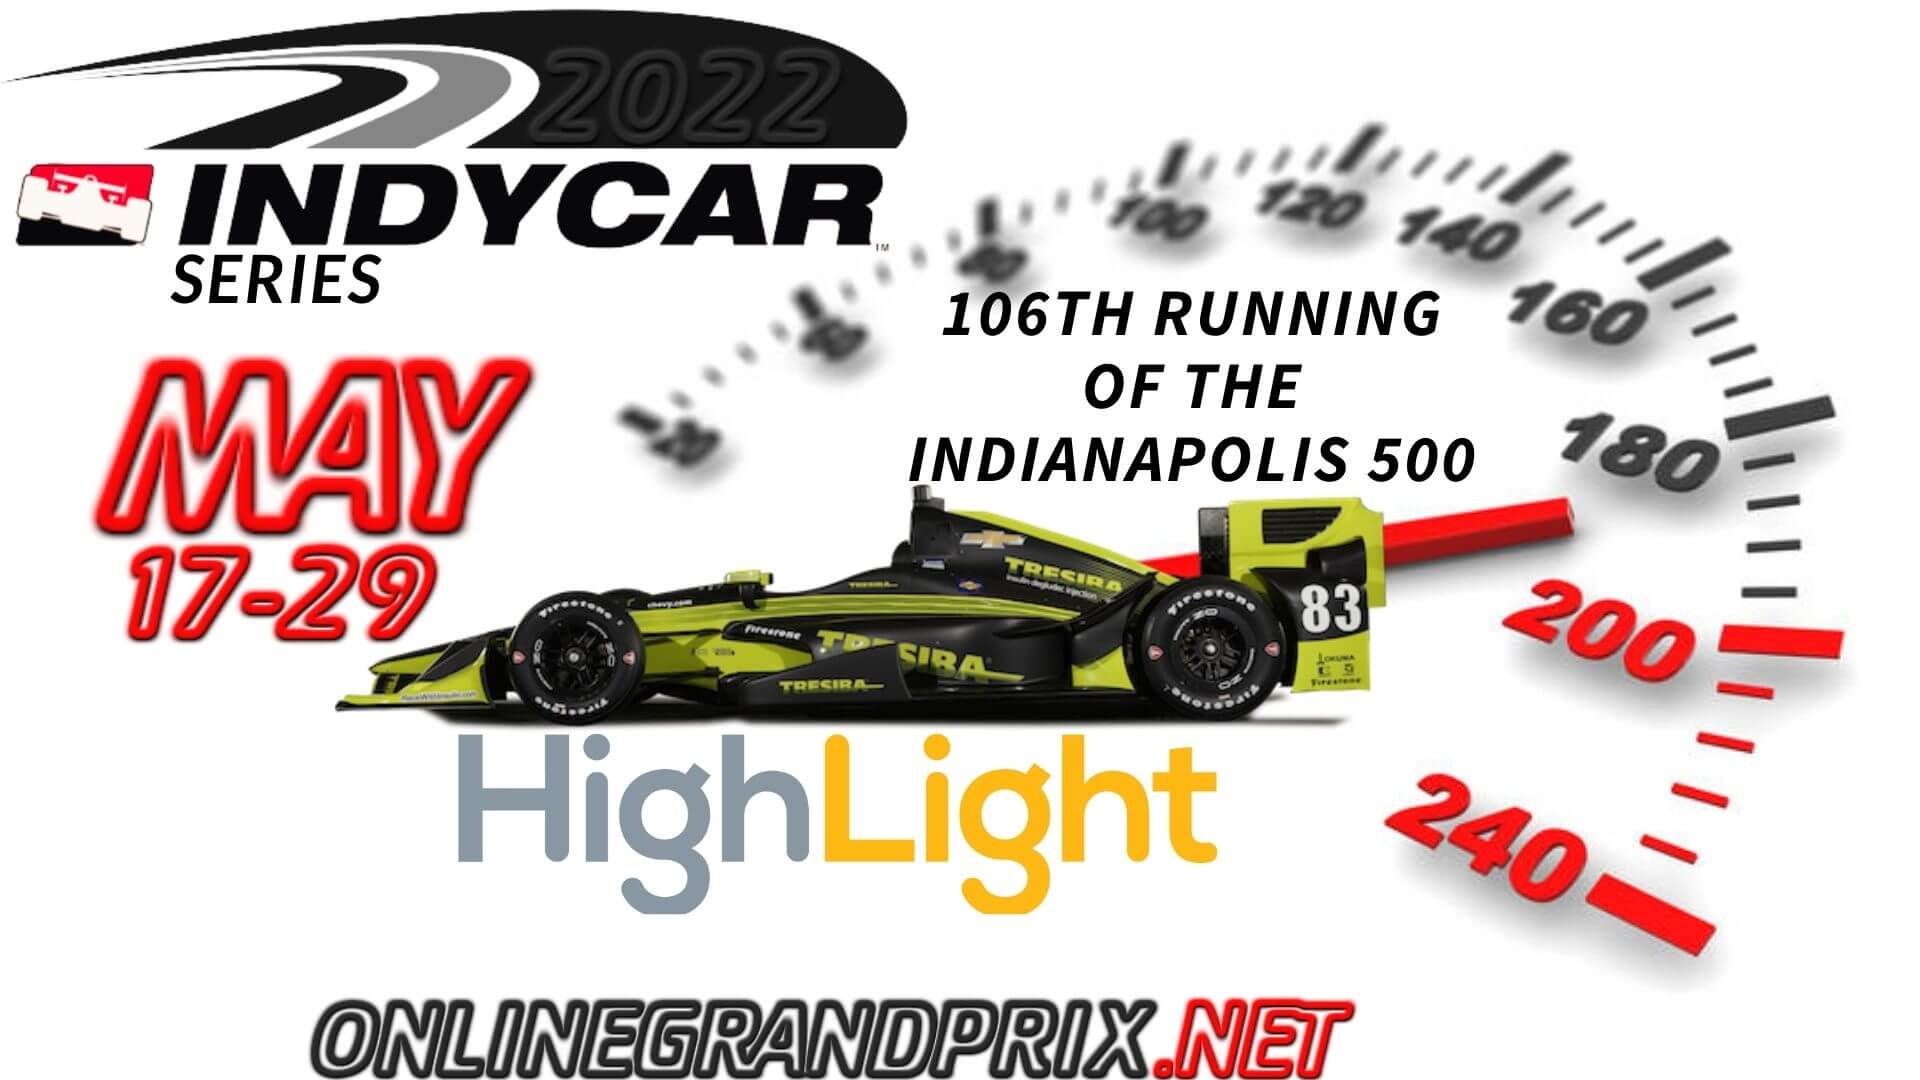 106th Running Of The Indianapolis 500 Highlights INDYCAR 2022